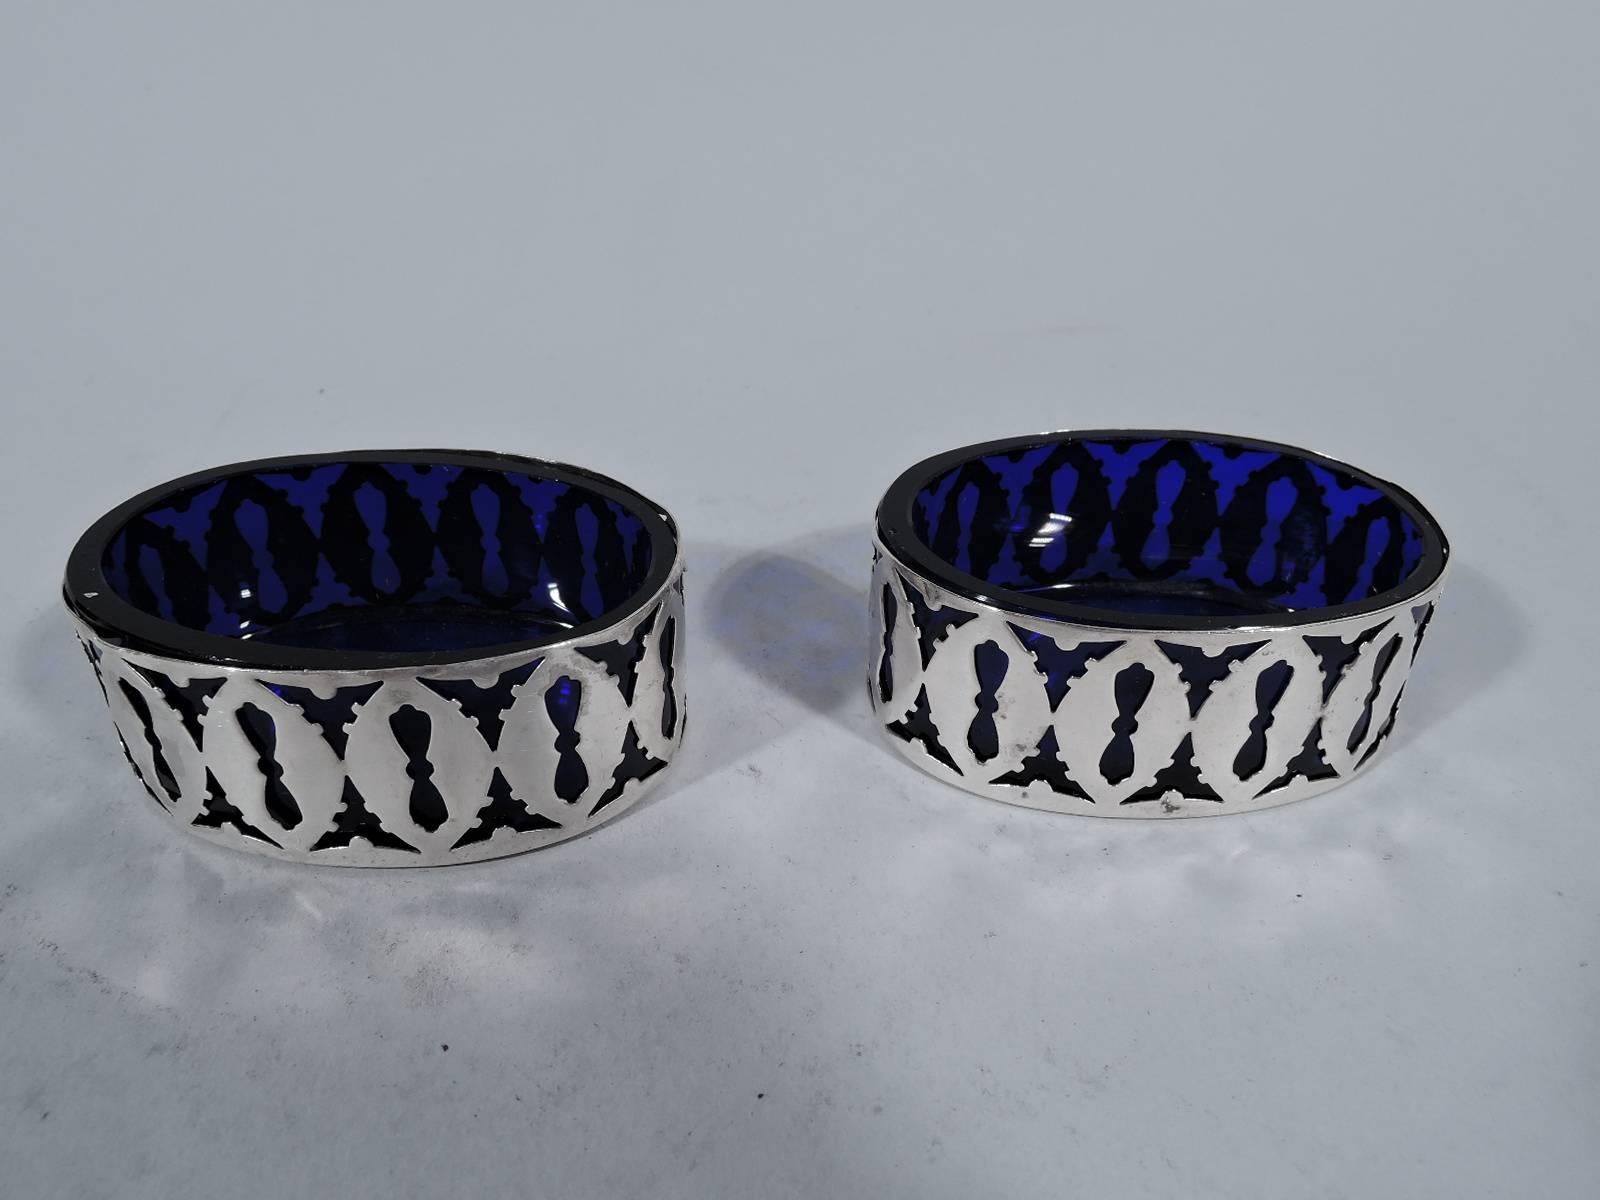 Set of four Edwardian sterling silver open salts. Made by Watrous (a division of International) in Wallingford, Conn., circa 1910. Oval bowl has straight sides with pierced keyhole motif. With cobalt glass liner. Hallmark includes no. 50. Total